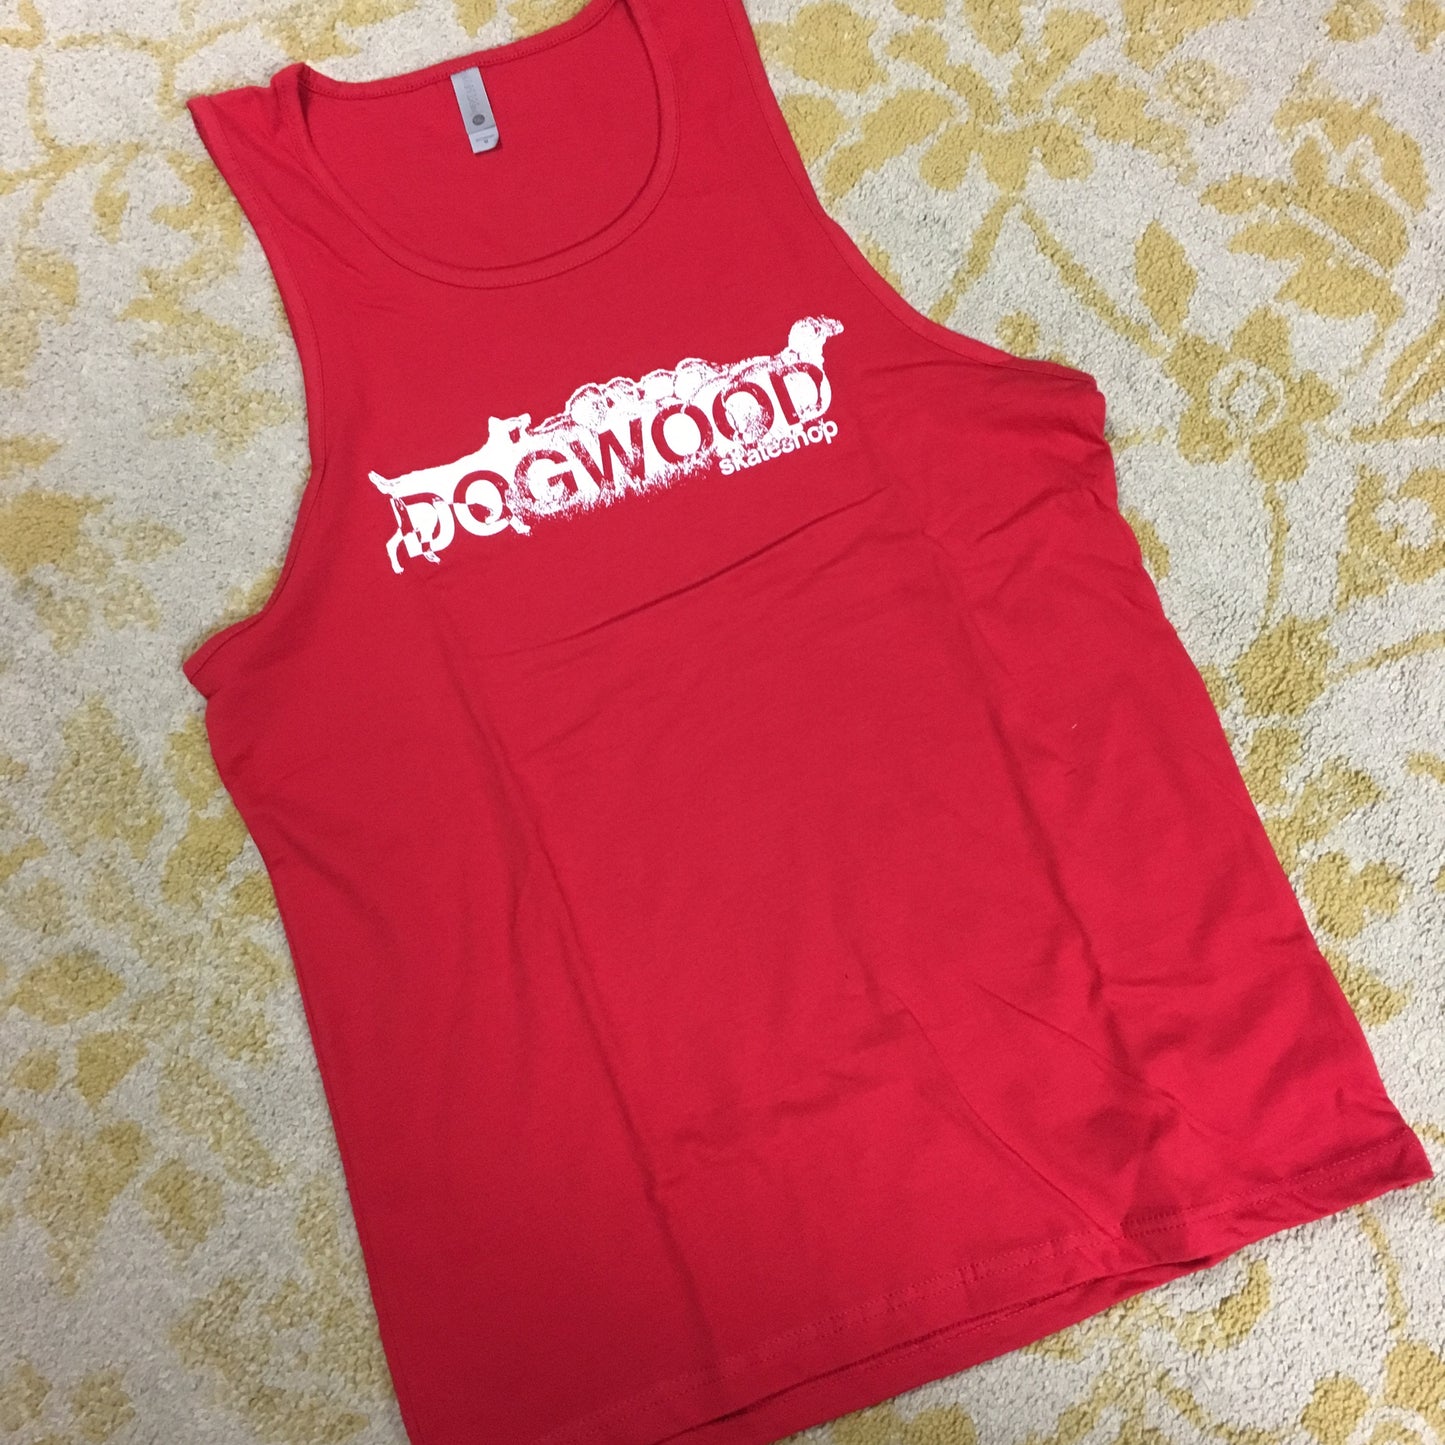 Mad Dog Tank Top Shirt Red/Wht (size options listed)